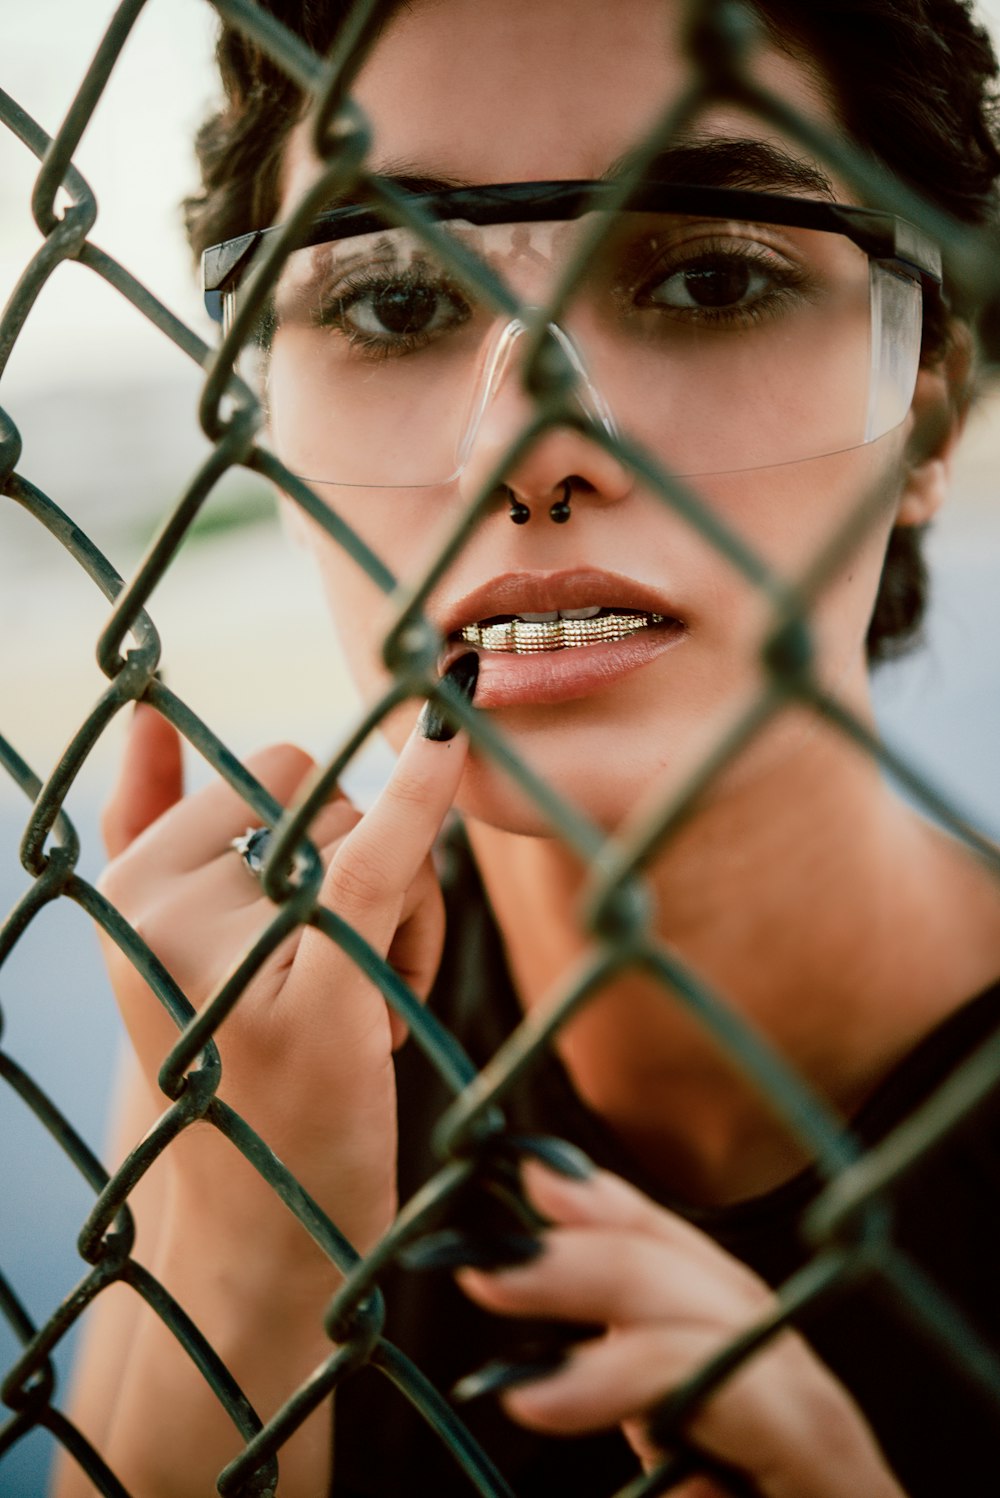 woman in red lipstick behind gray metal fence